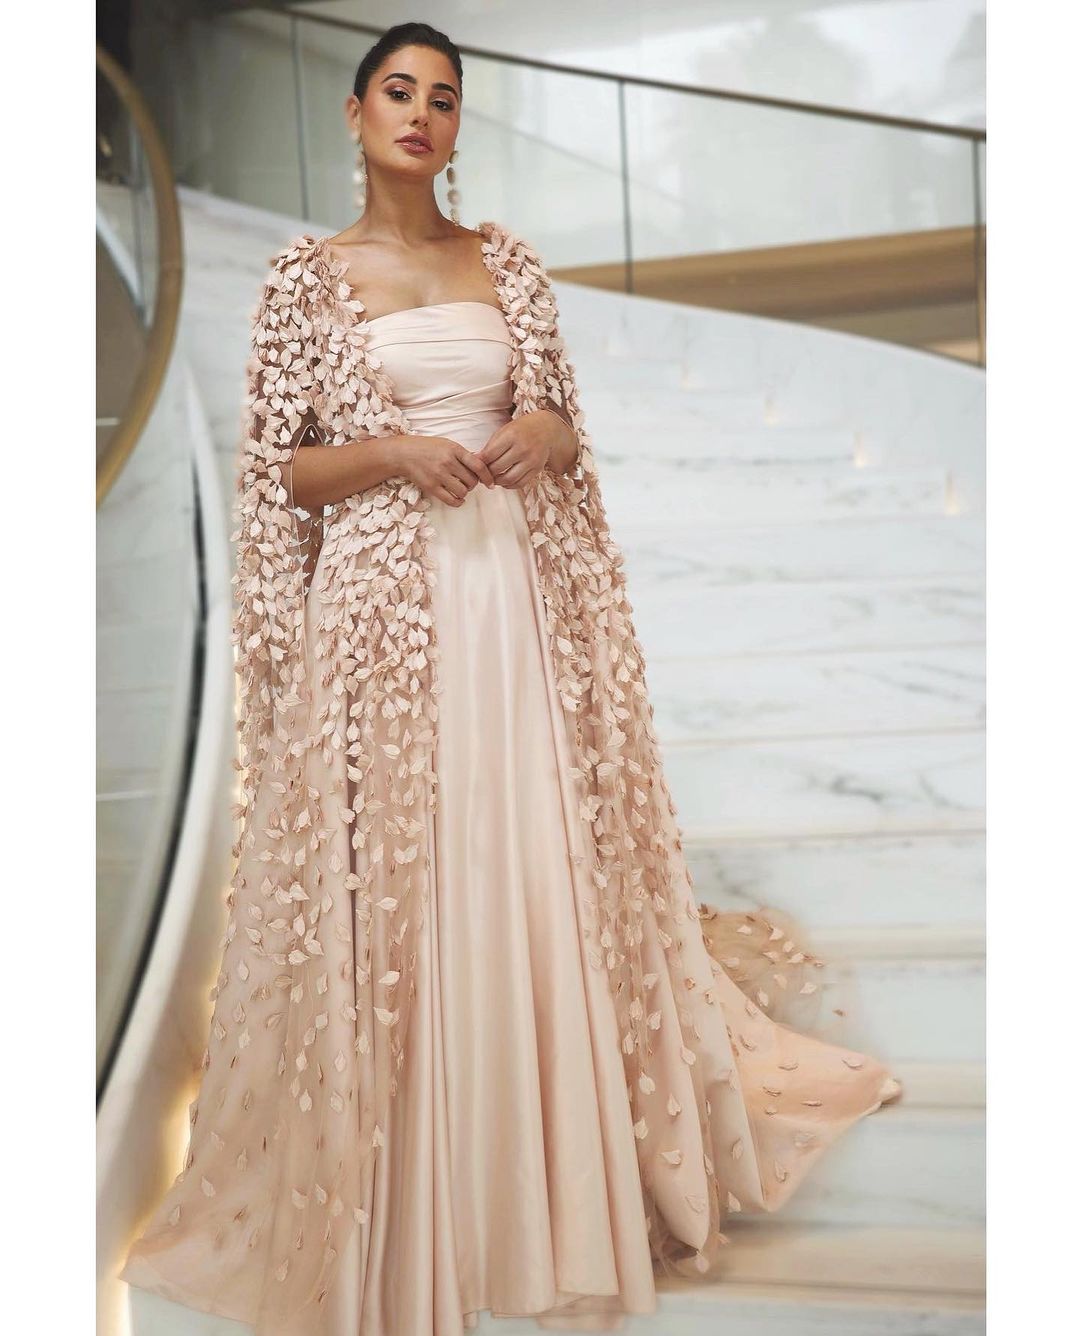 Nargis Fakhri cut a statusque figure in the blush pink gown with a cape